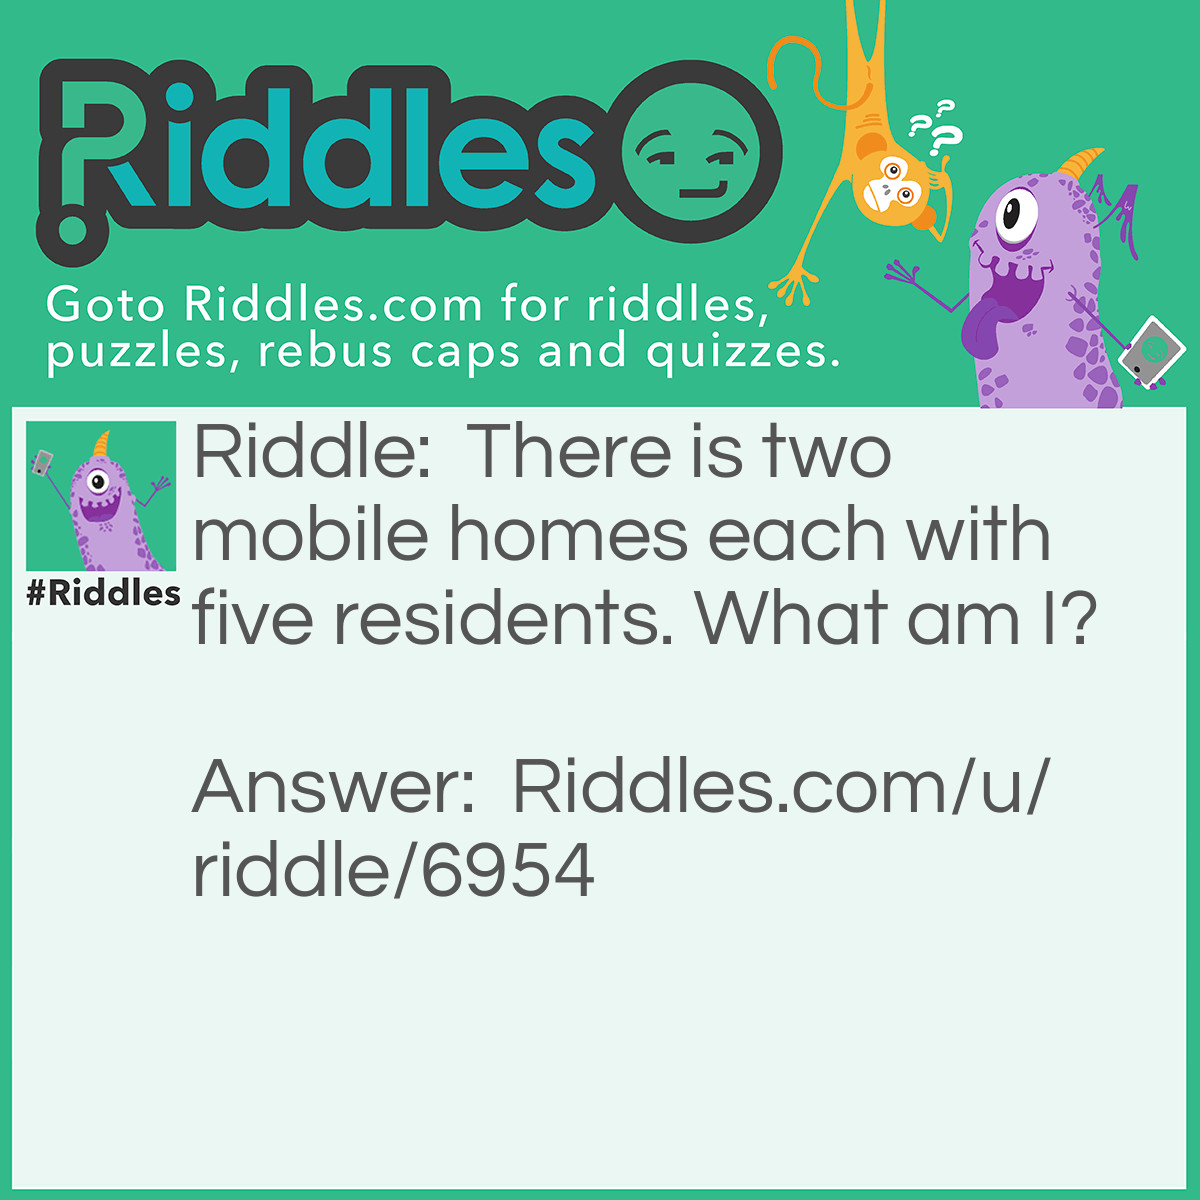 Riddle: There is two mobile homes each with five residents. What am I? Answer: A pair of shoes. 4 fingers and a thumb in each home.